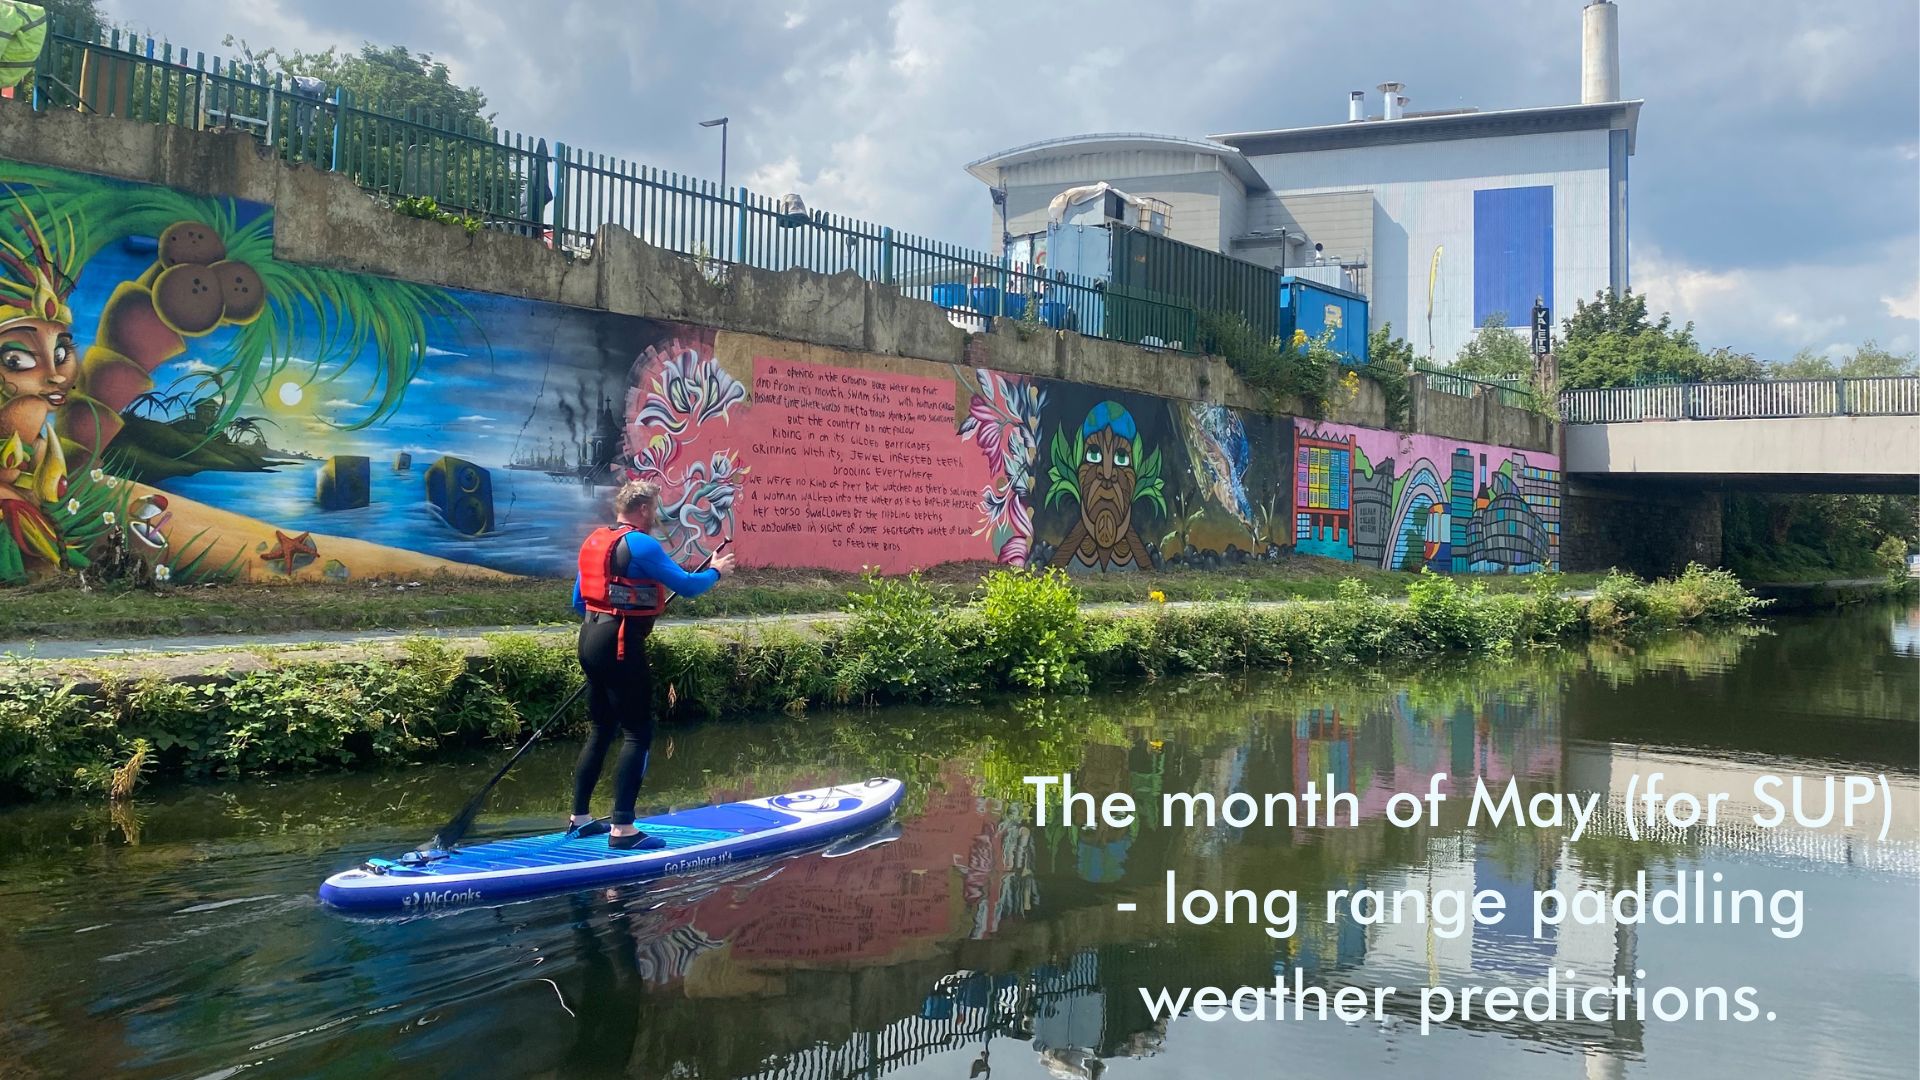 You are currently viewing The month of May (for SUP) – long range paddling weather predictions.